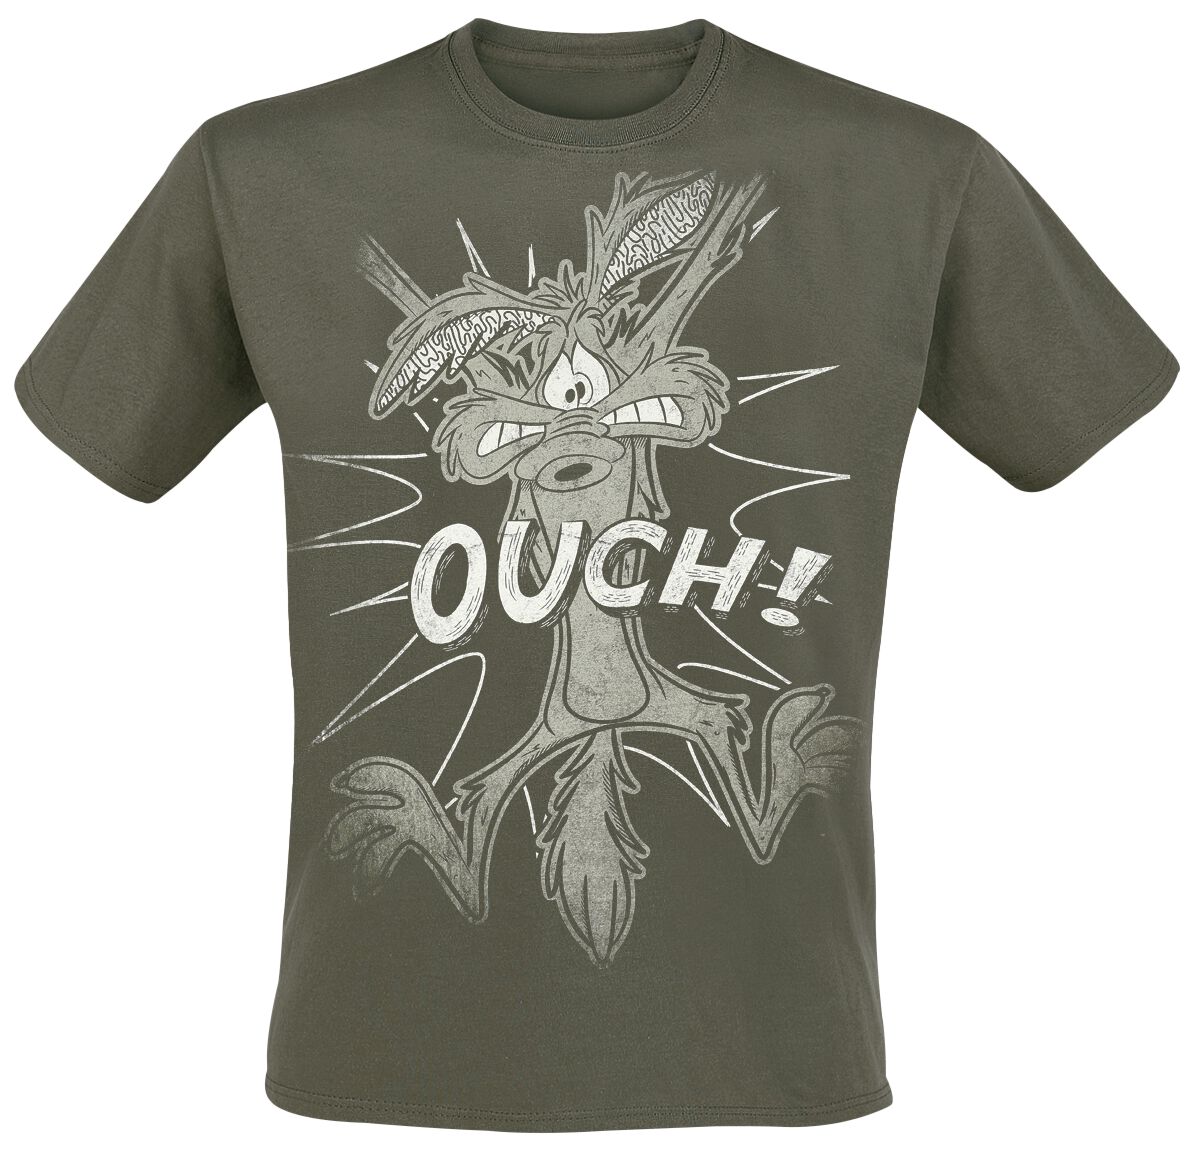 Image of T-Shirt di Looney Tunes - Coyote - Ouch! - S a 3XL - Uomo - verde oliva